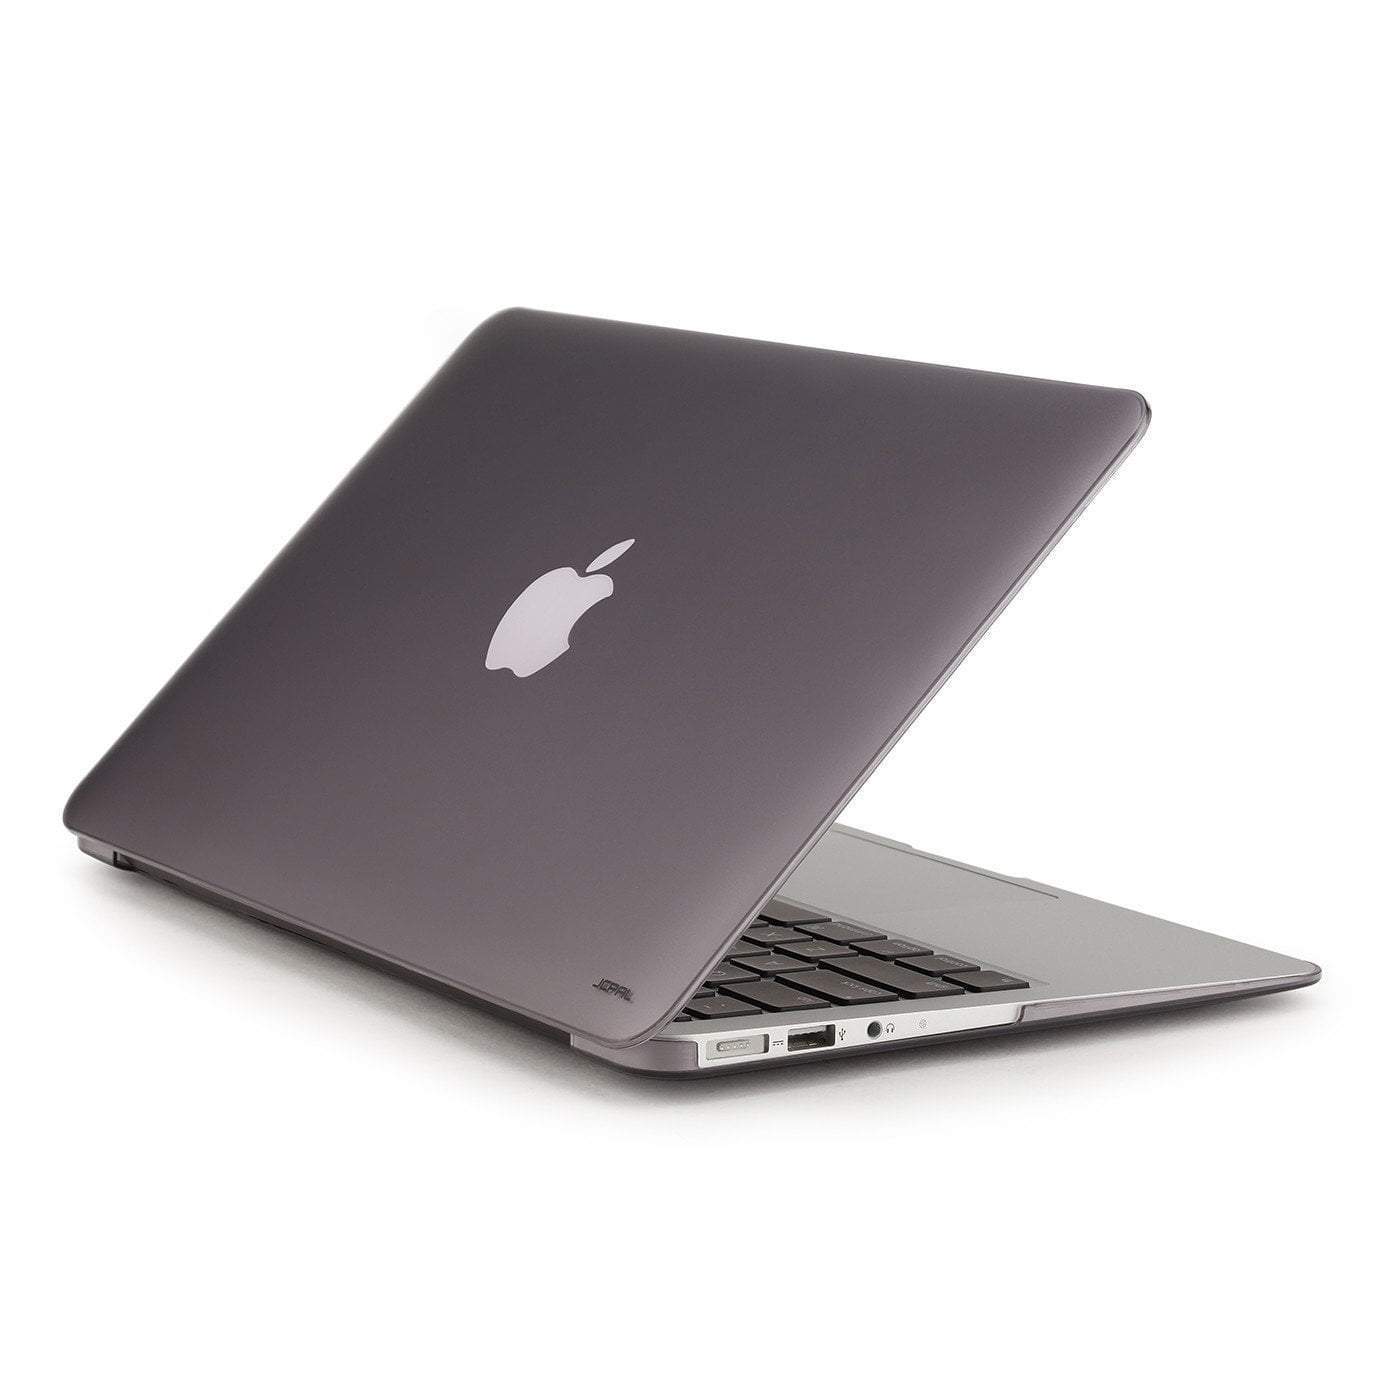 JCPal Case MacGuard Ultra-thin Protective Case for MacBook Air 11" MacBook Air 11" / Grey